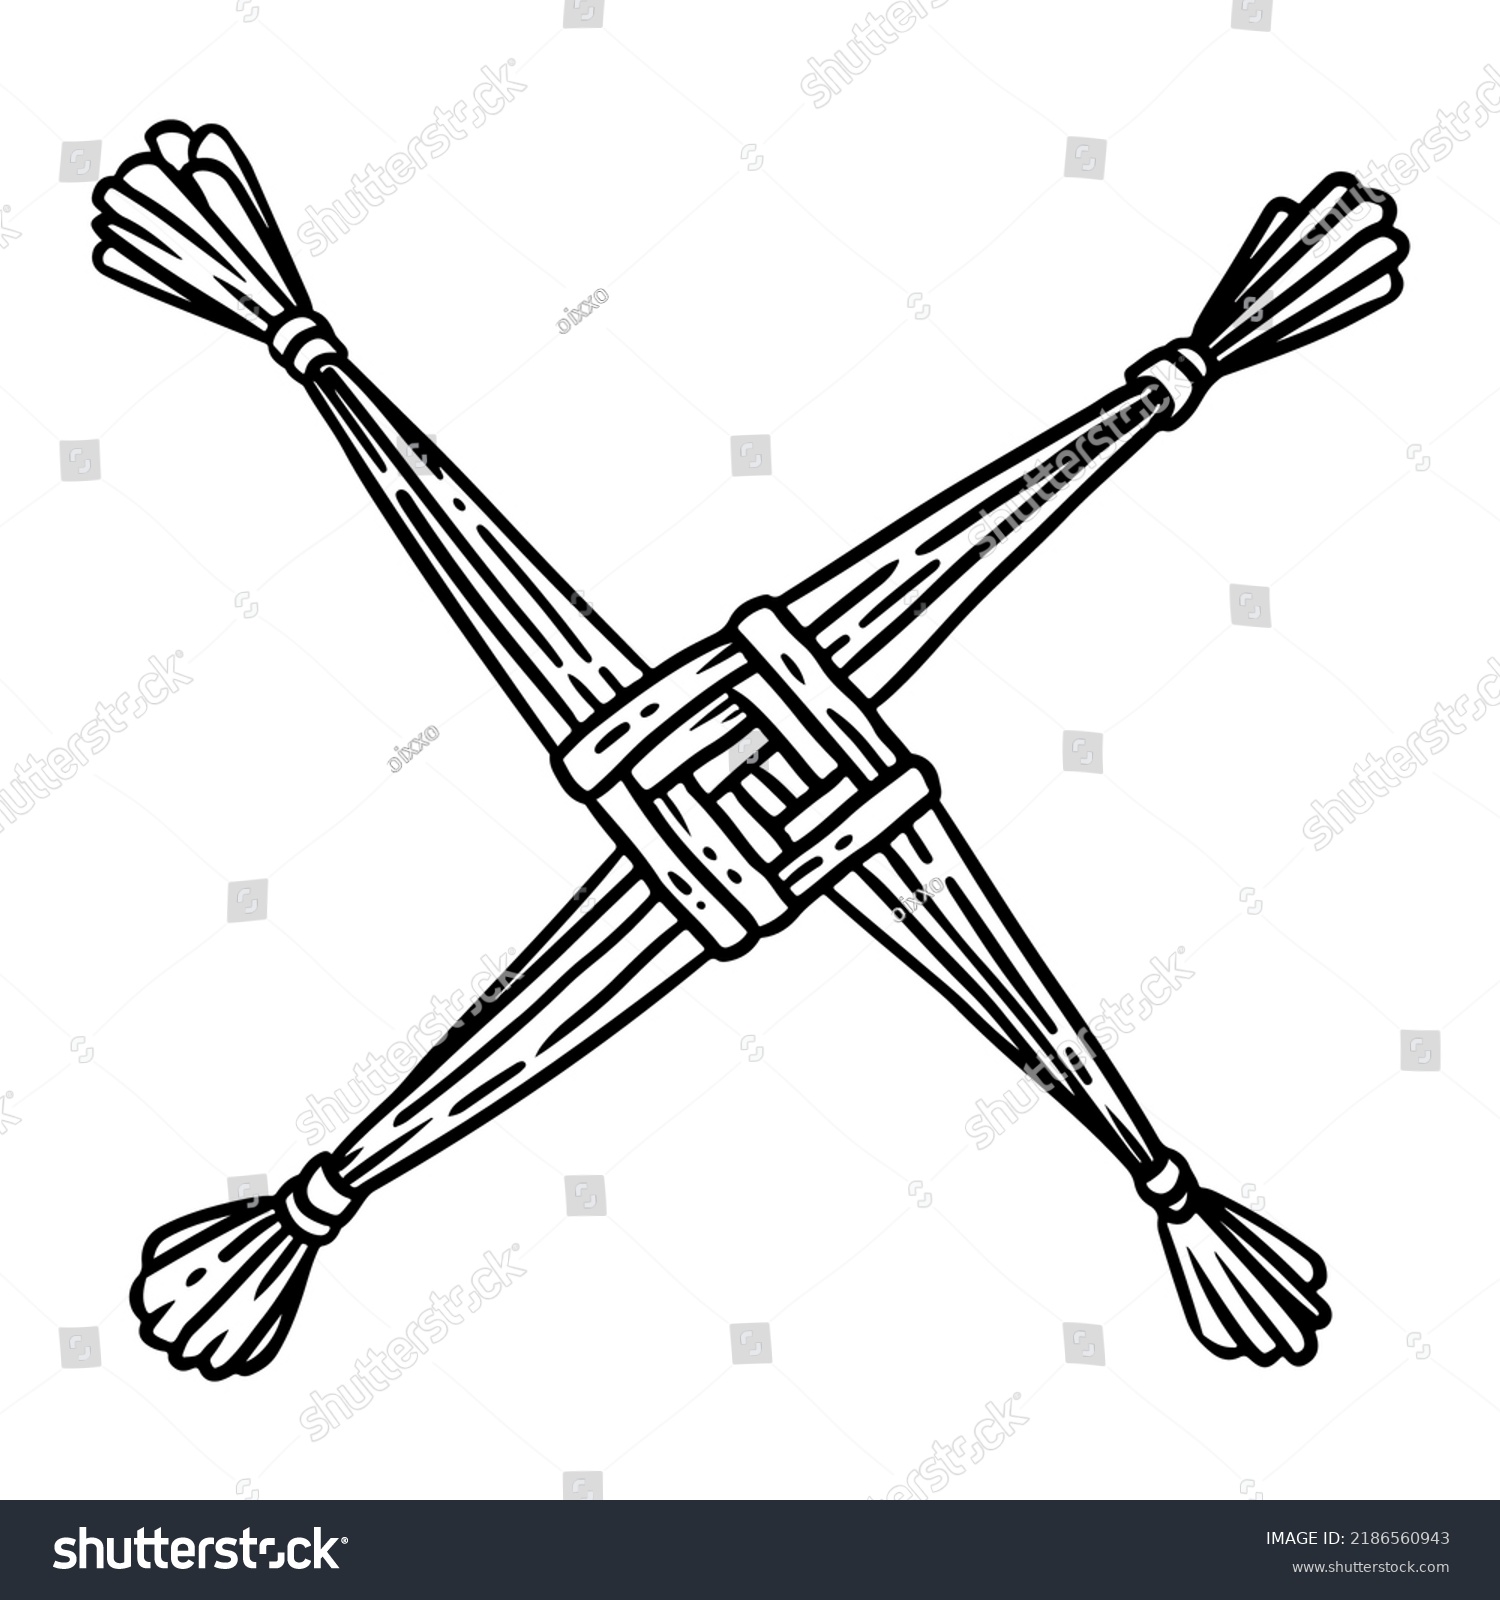 SVG of Brigid's Cross made of straw hand-drawn doodle isolated icon. Wiccan pagan sketched symbol. Isolated vector element, Hand drawn lineart illustration for prints, designs, cards. svg